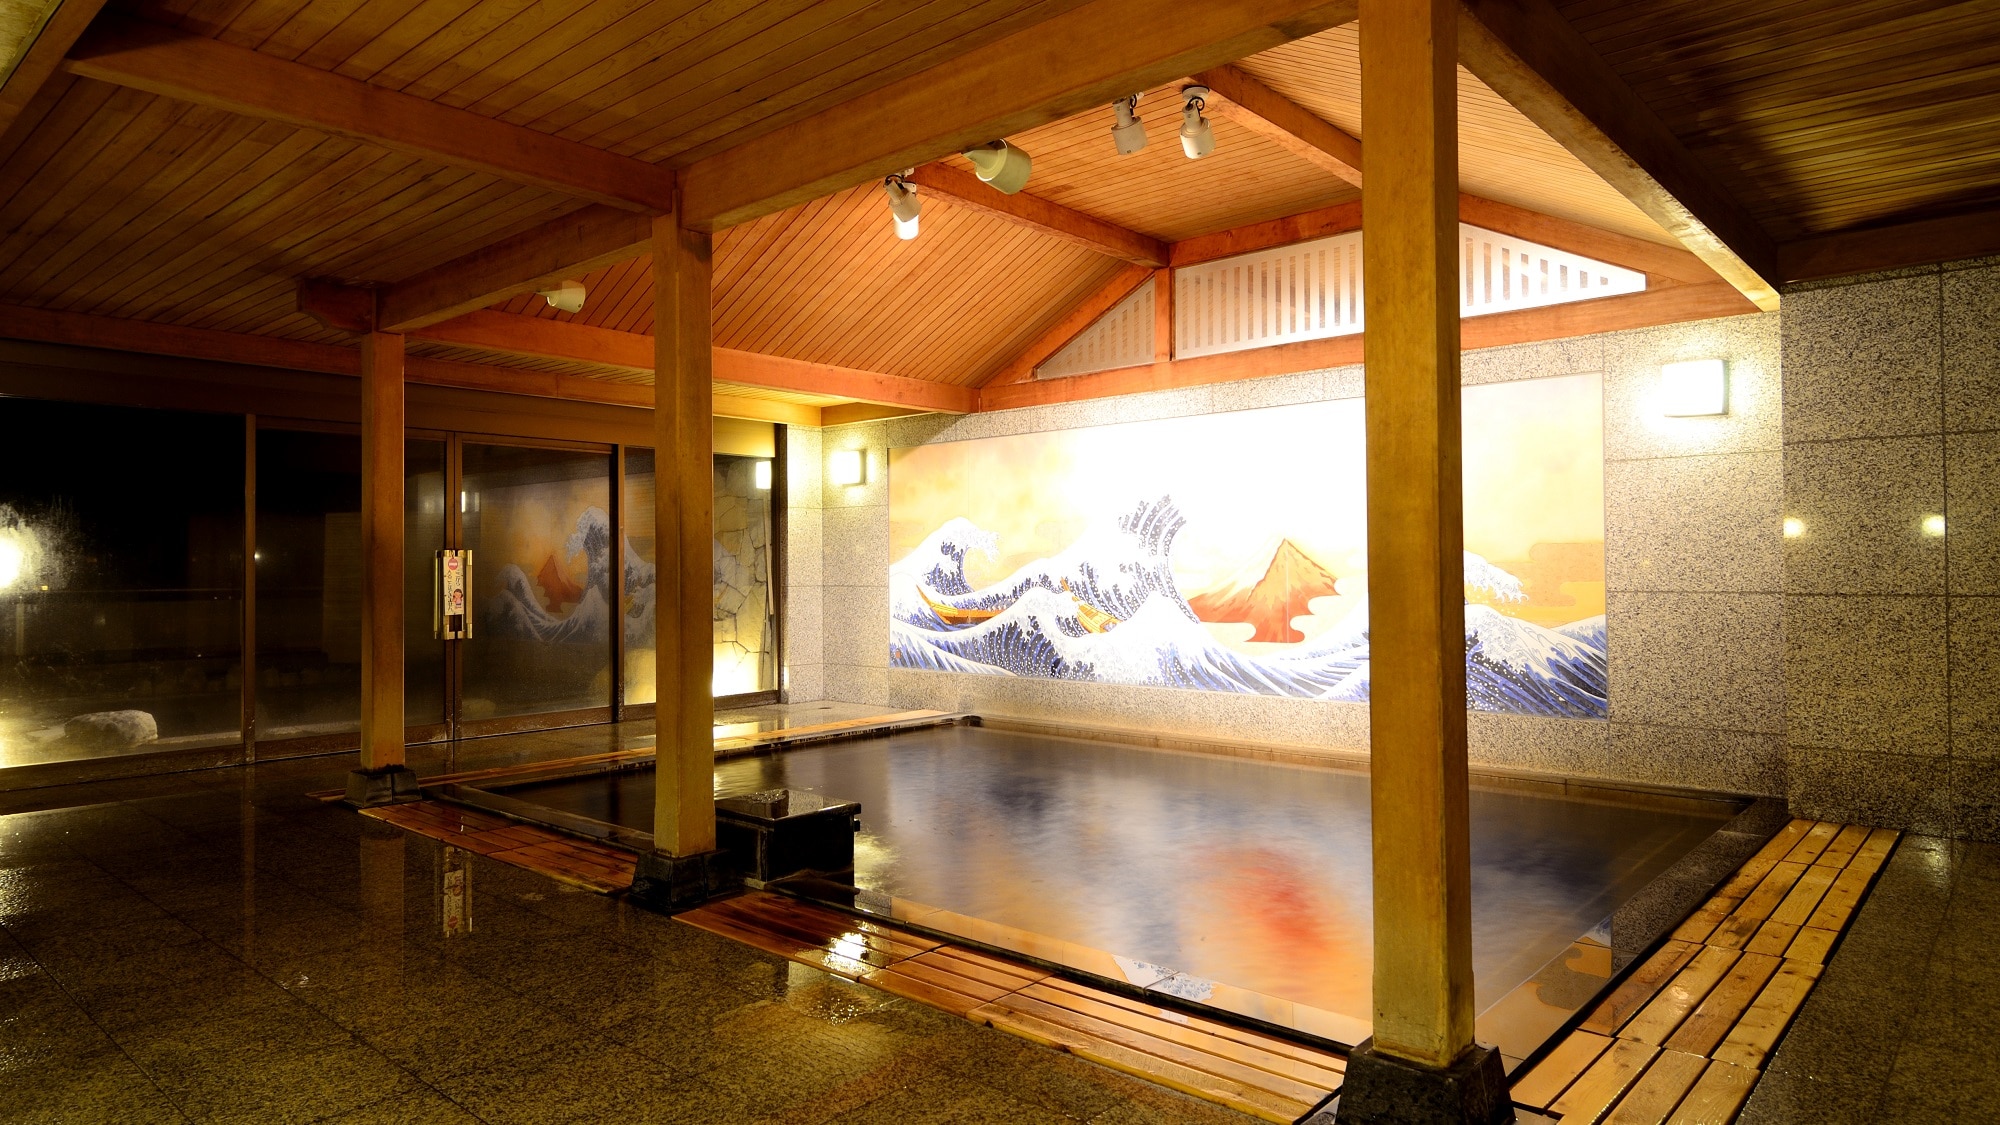 [Large communal bath] A Japanese bath with a calm atmosphere and a nostalgic mural painting.